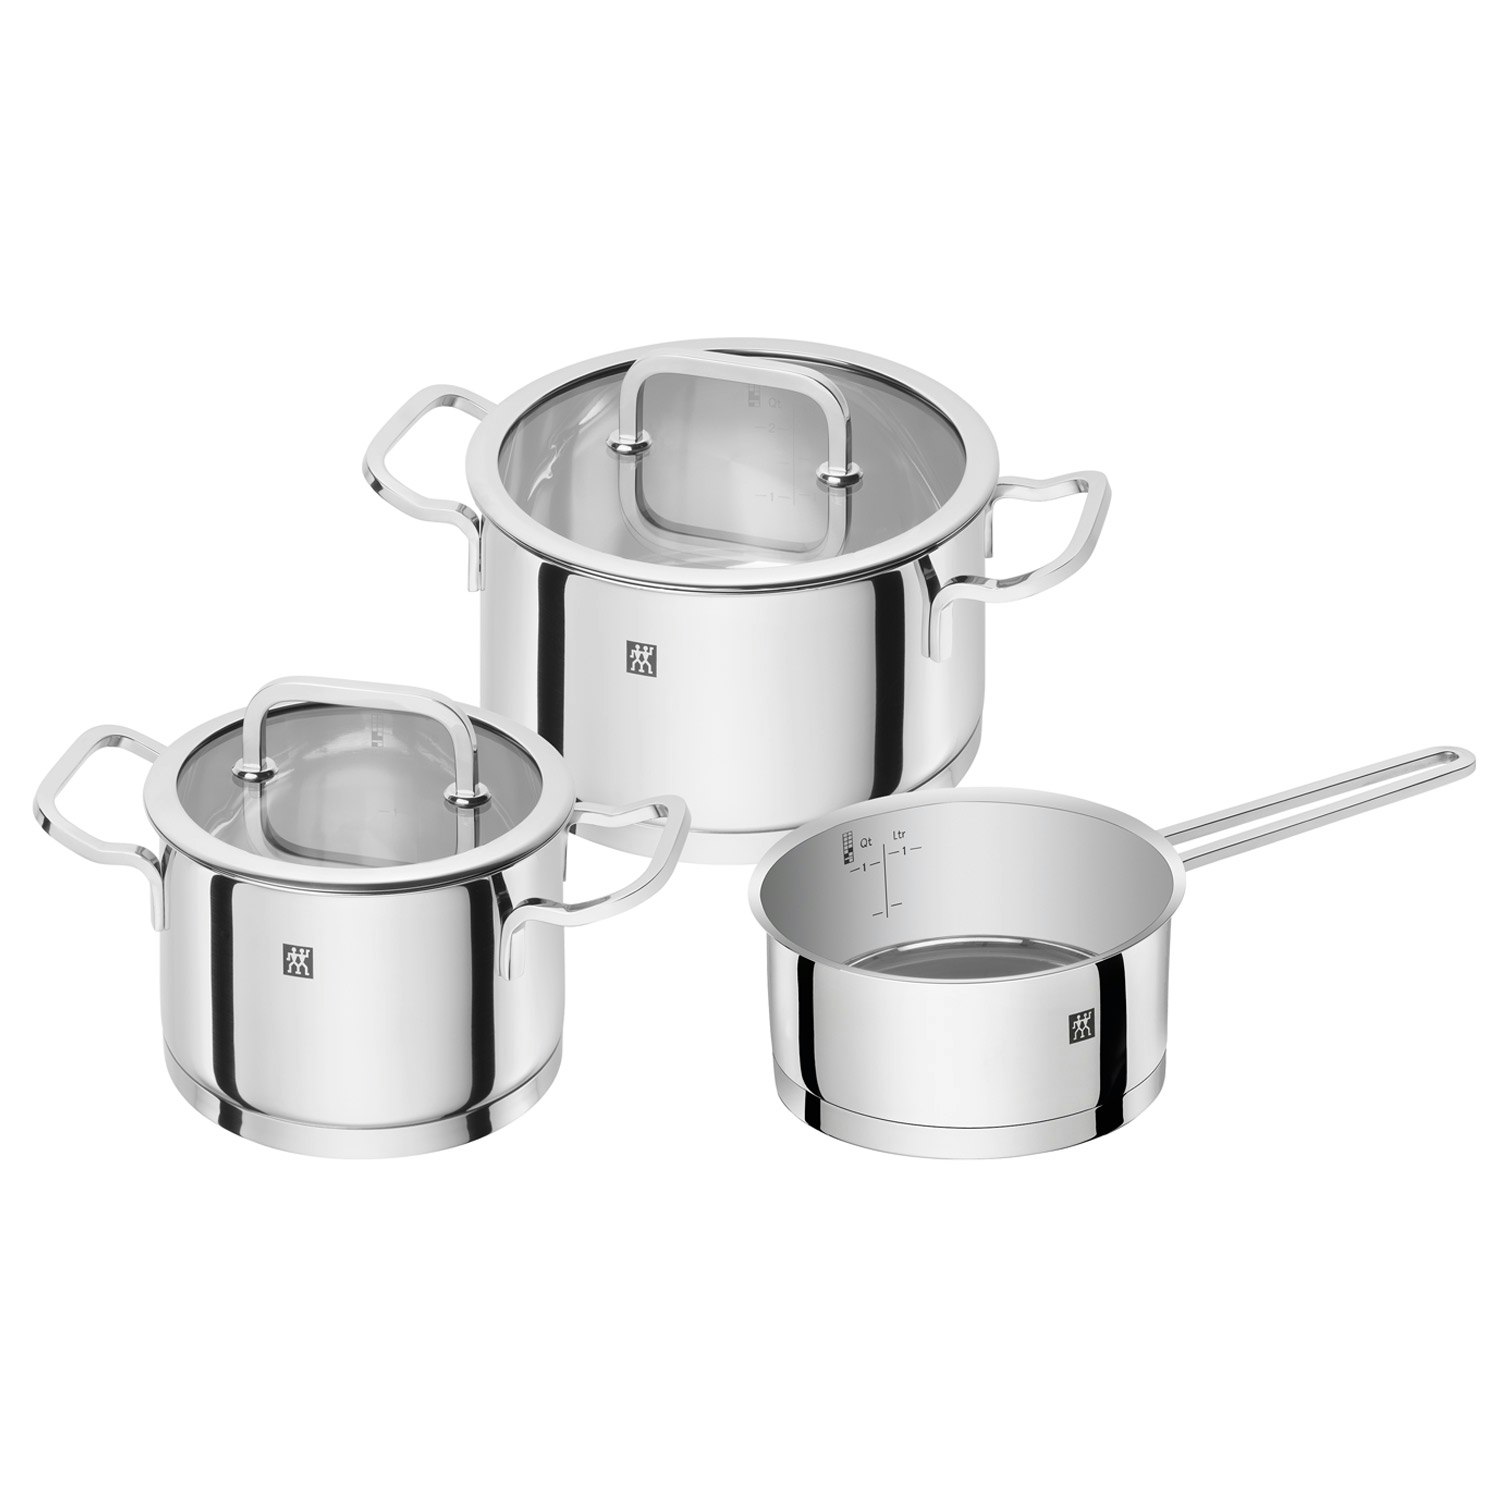 Tefal Cookware Set Essential 8pcs Online at Best Price, Cookware Sets